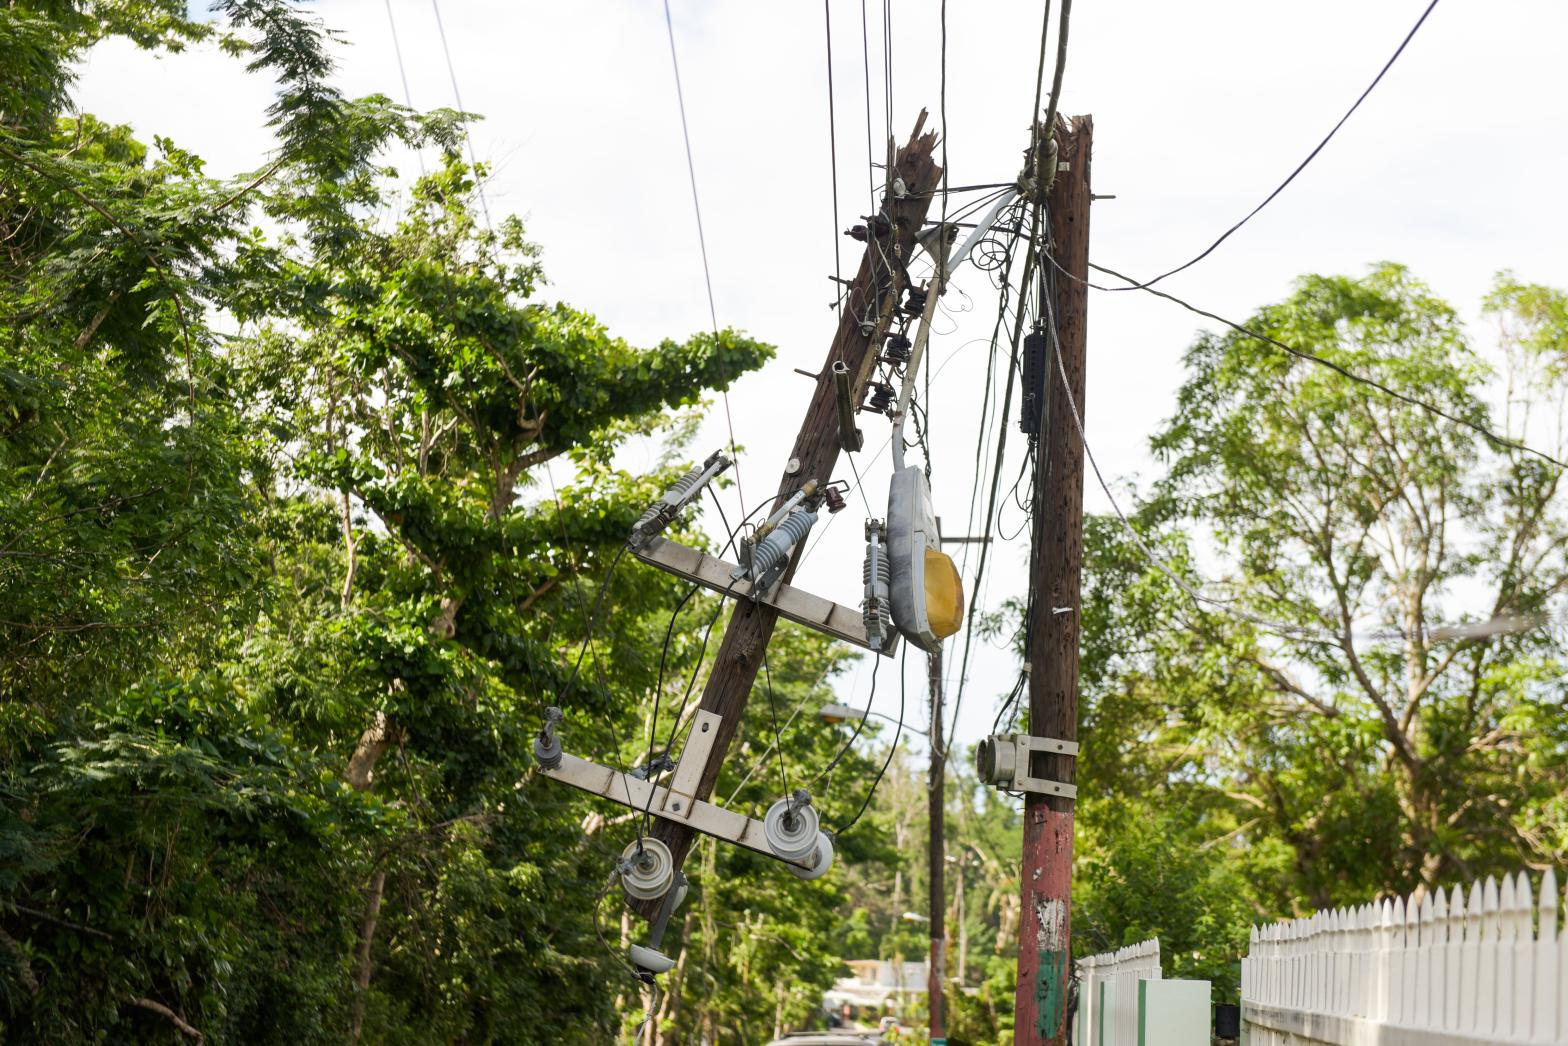 Hurricane Maria aftermath in Puerto Rico. Dangerous power lines and power pole dangle over street traffic in Vega Alta, Puerto Rico (Photo: alejandrophotography, Getty Images)